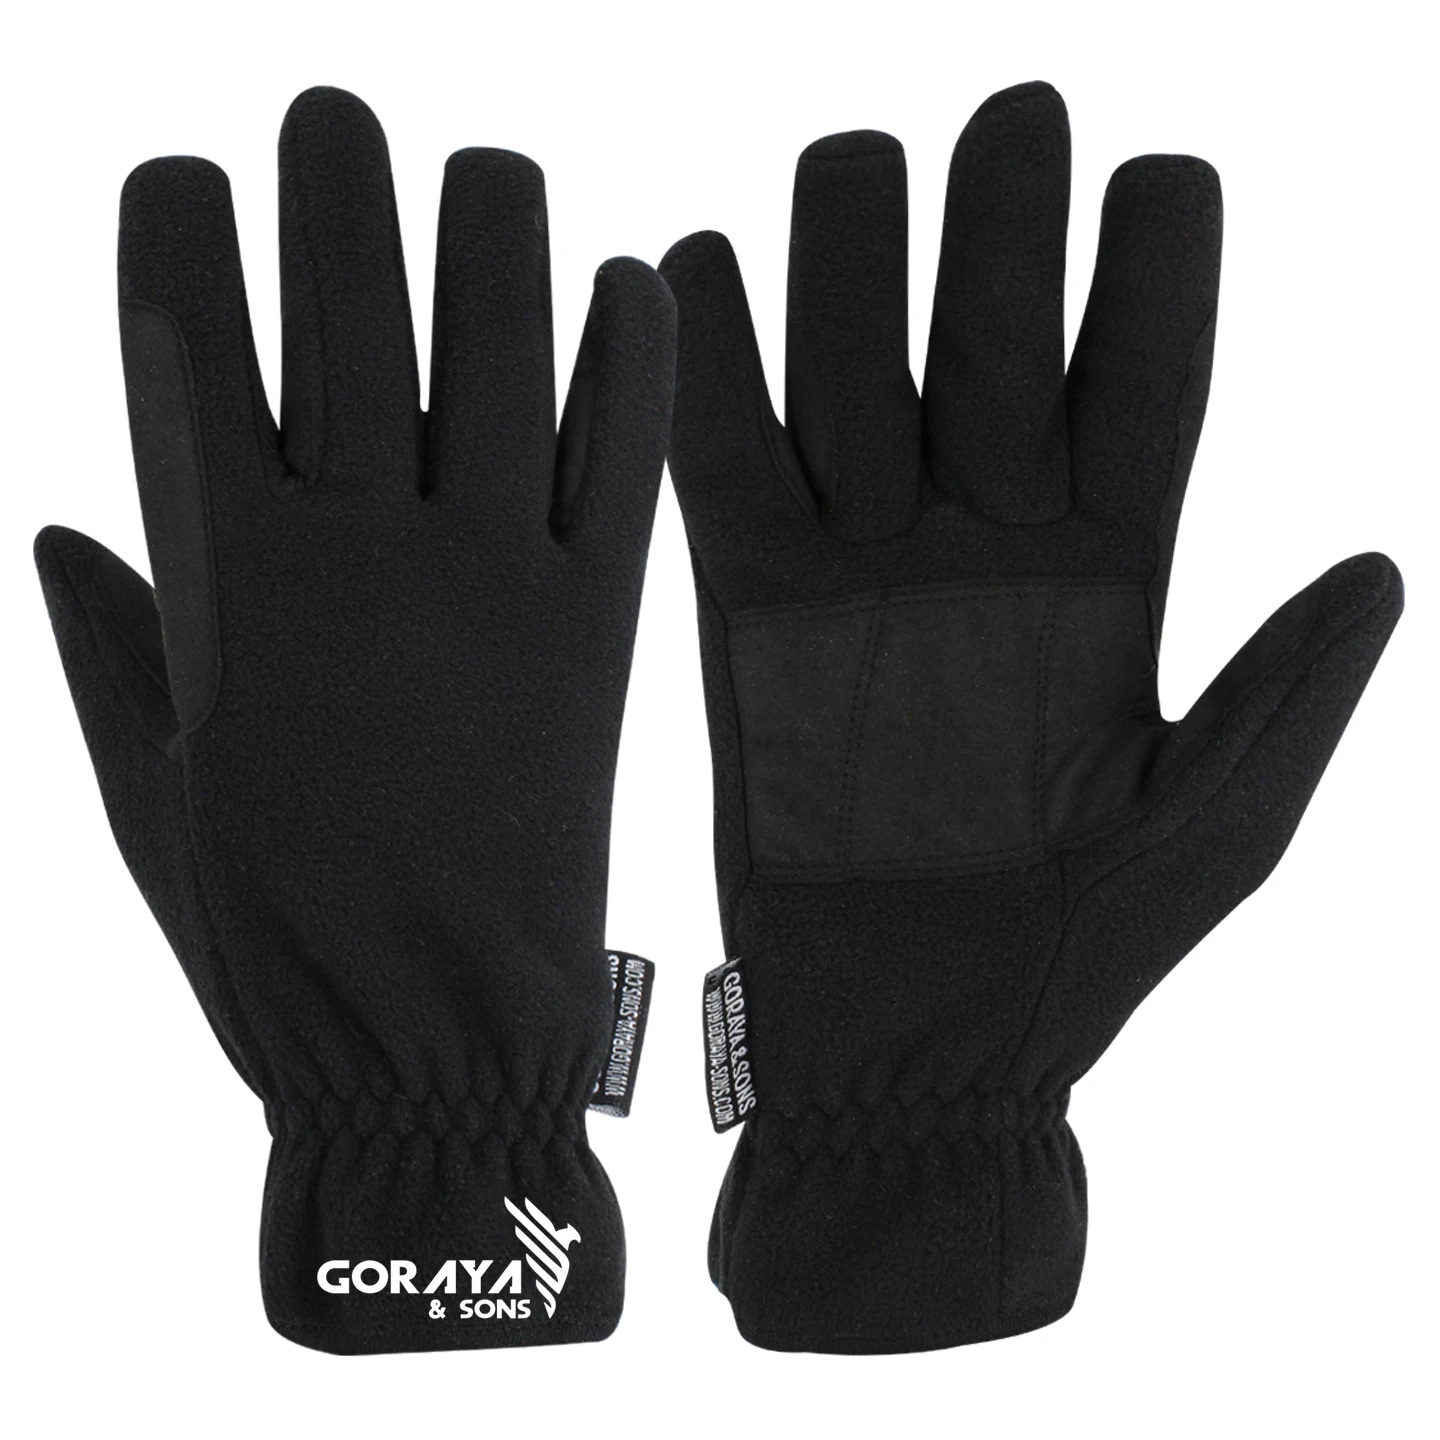 Synthetic Grip Horse Riding Gloves All Season Unisex Equestrian Gloves Manufacturer Factory Price Wholesale